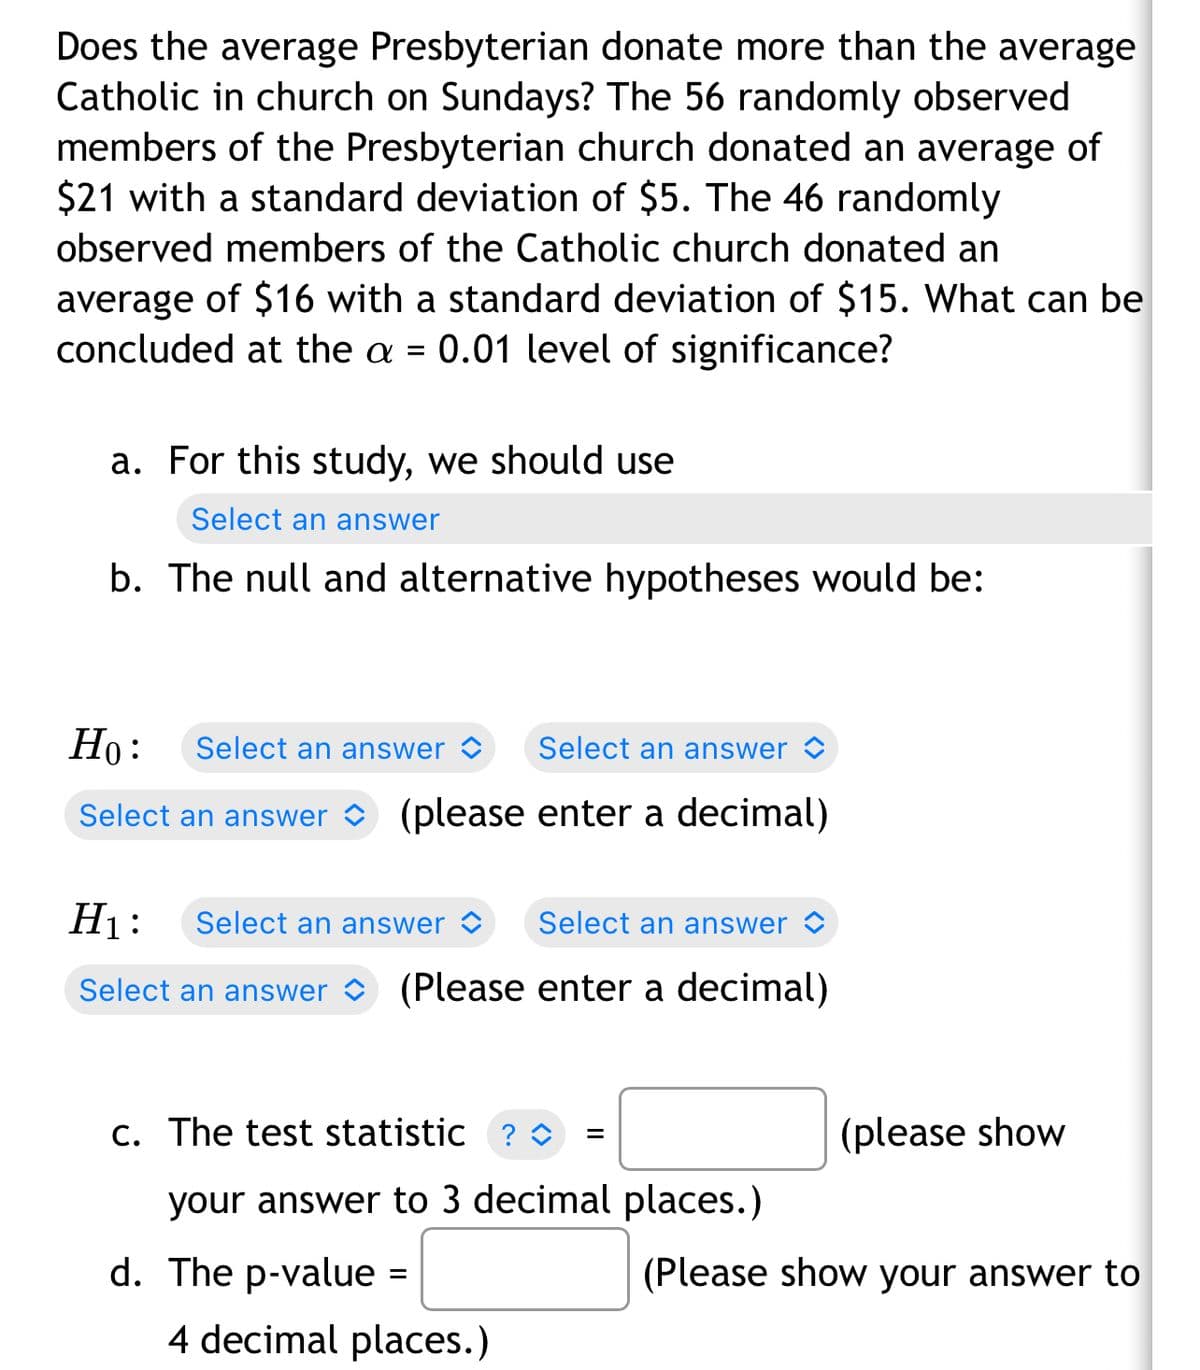 Does the average Presbyterian donate more than the average
Catholic in church on Sundays? The 56 randomly observed
members of the Presbyterian church donated an average of
$21 with a standard deviation of $5. The 46 randomly
observed members of the Catholic church donated an
average of $16 with a standard deviation of $15. What can be
concluded at the a = 0.01 level of significance?
a. For this study, we should use
Select an answer
b. The null and alternative hypotheses would be:
Ho:
Select an answer
Select an answer
Select an answer (please enter a decimal)
H₁: Select an answer
Select an answer
Select an answer (Please enter a decimal)
c. The test statistic ? ◊
=
your answer to 3 decimal places.)
d. The p-value =
4 decimal places.)
(please show
(Please show your answer to